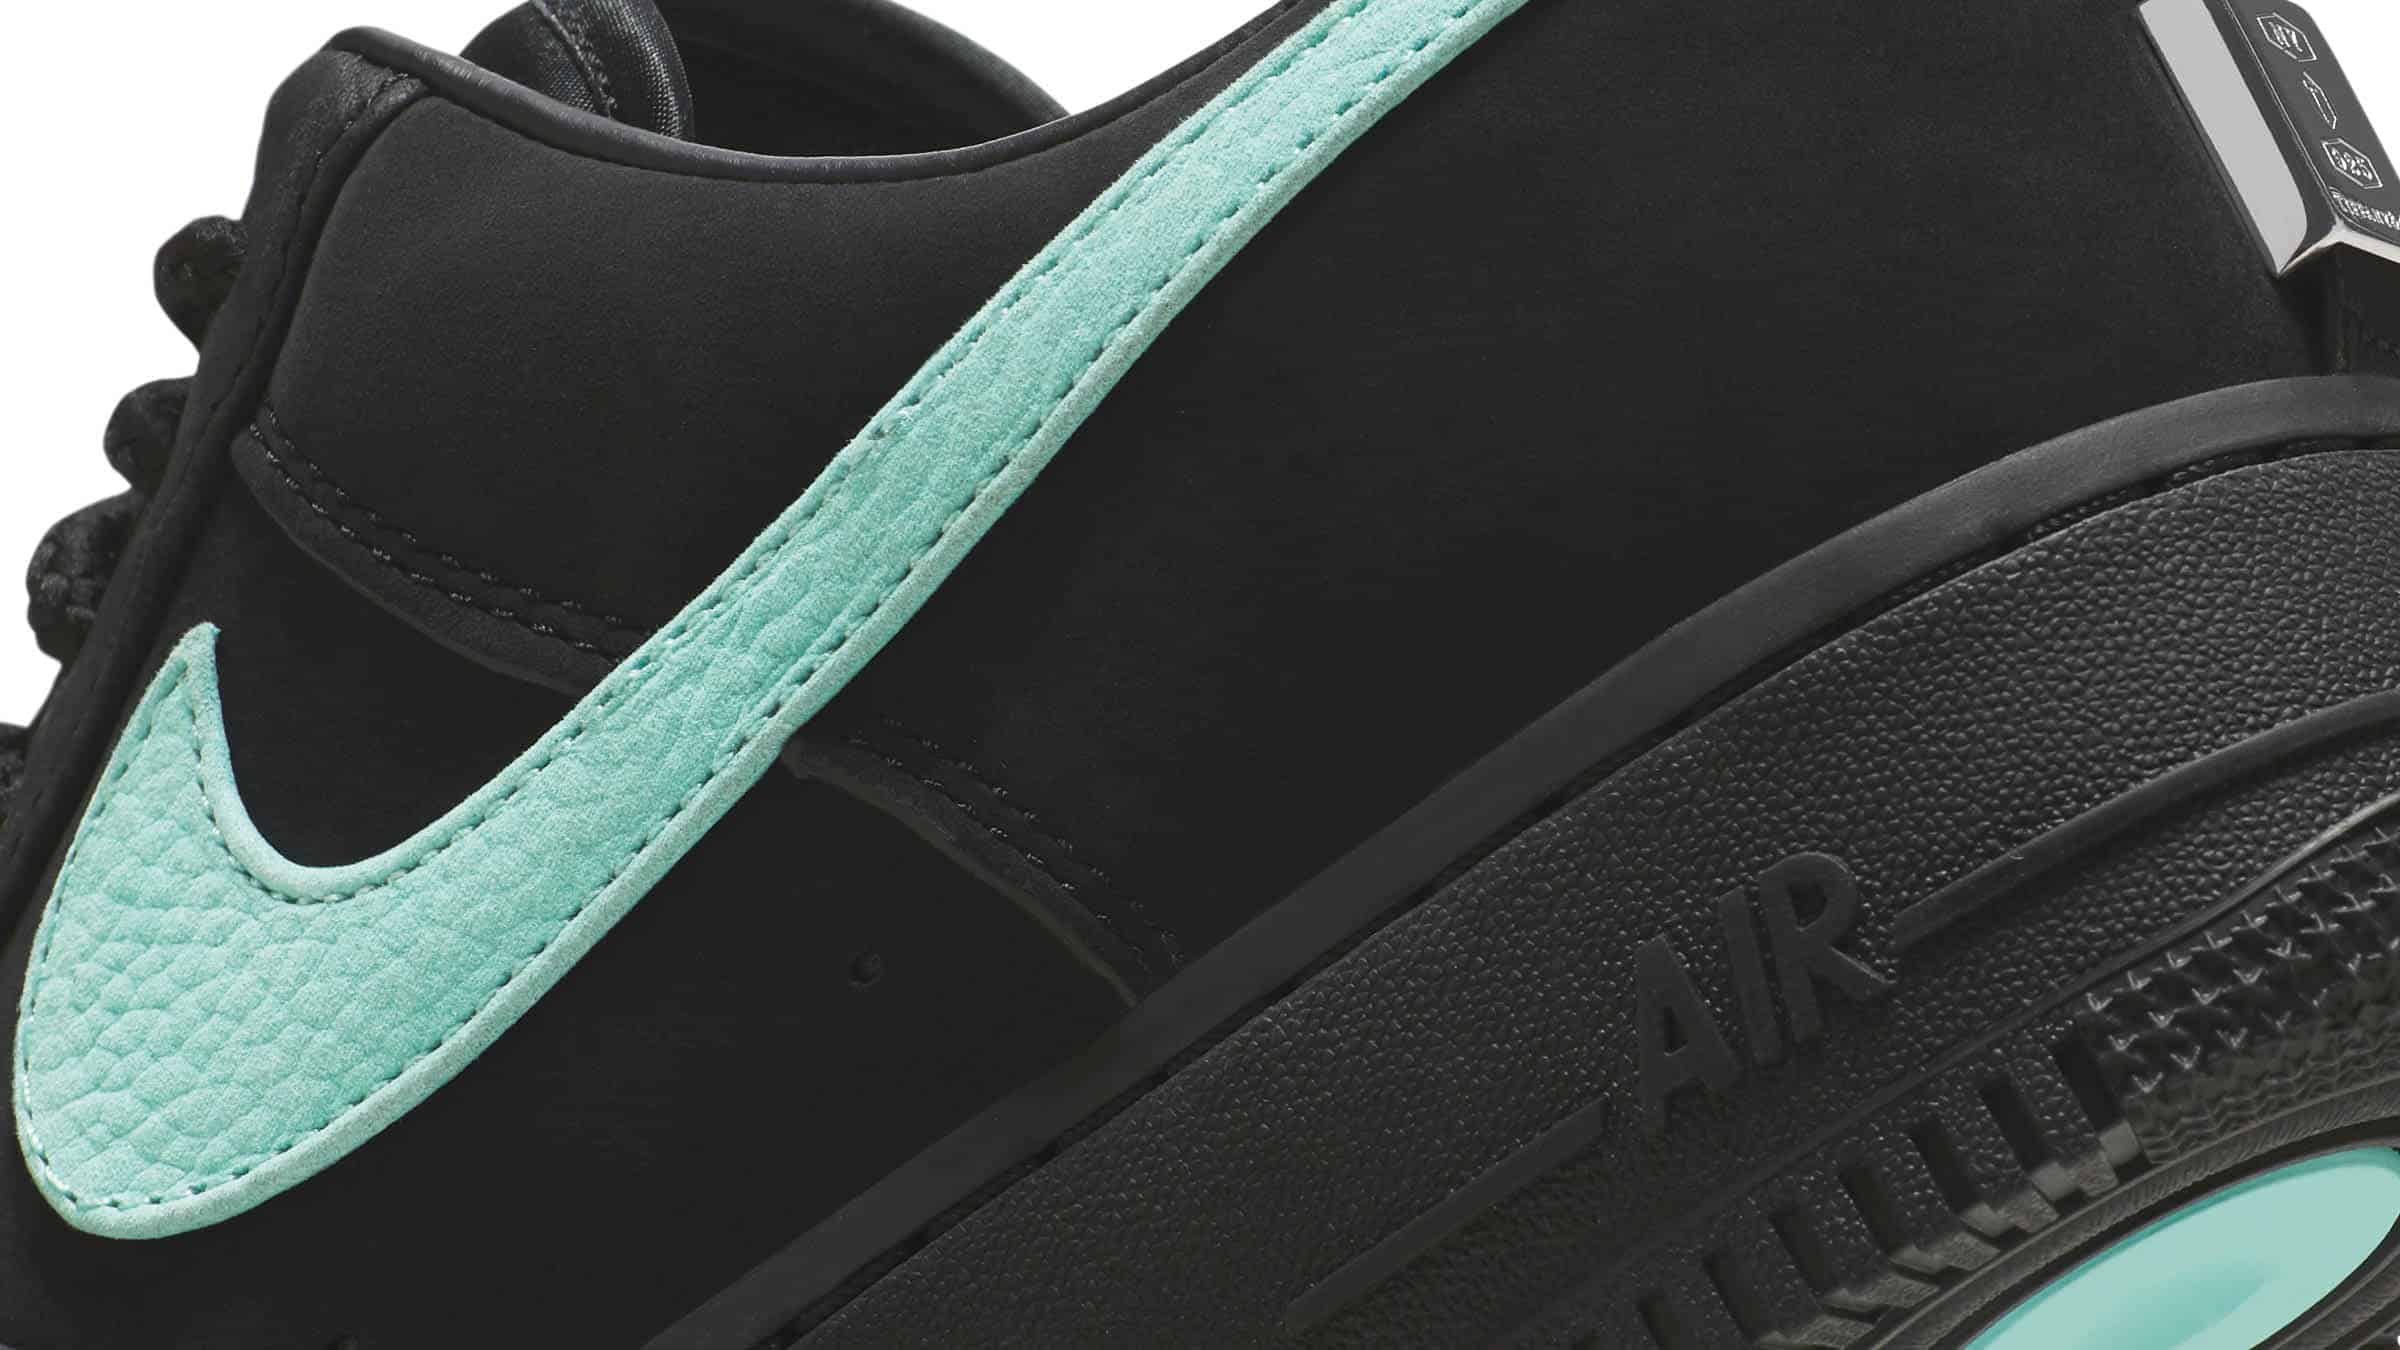 Tiffany's First Footwear Collaboration With Nike Sees Lukewarm